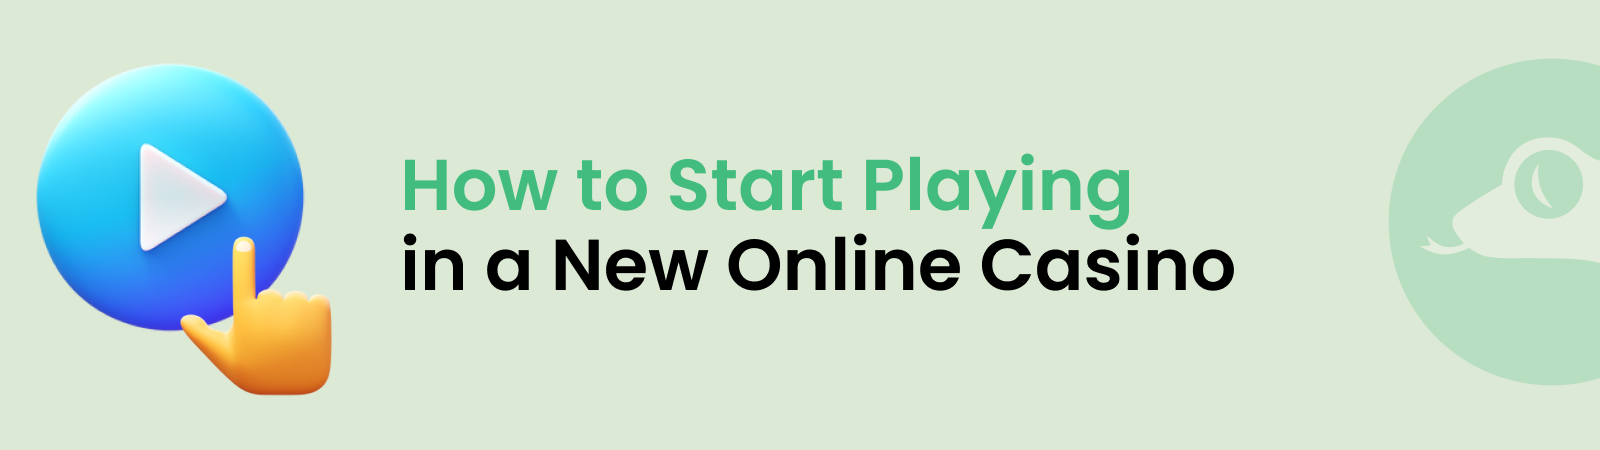 how to start playing in new online casino